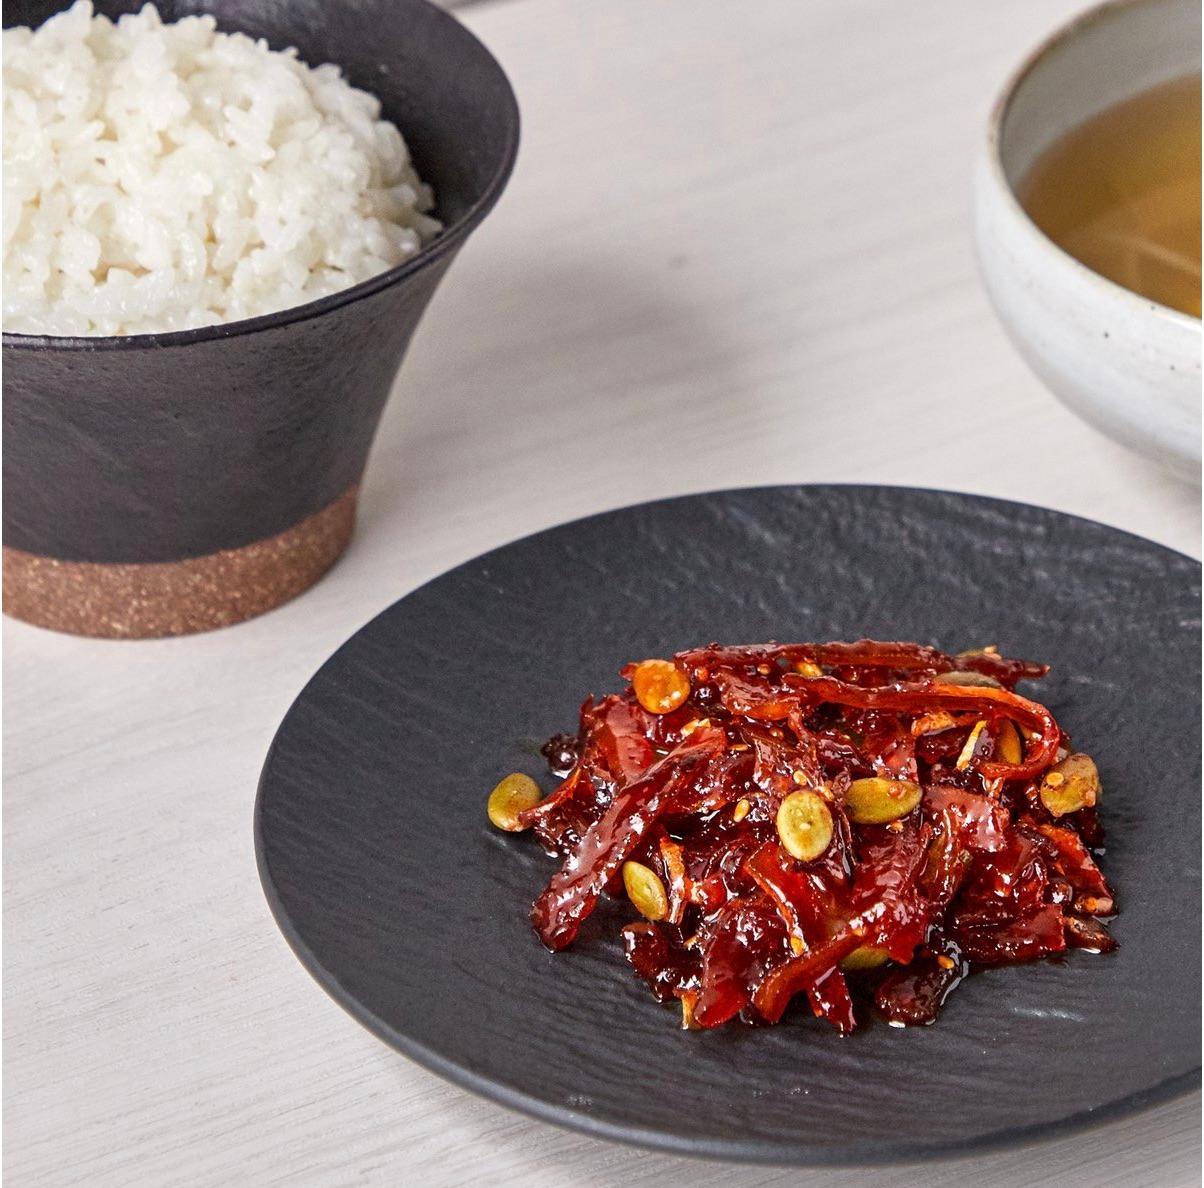 korean brand sempio's stir-fried dried pollock in gochujang in plated with rice